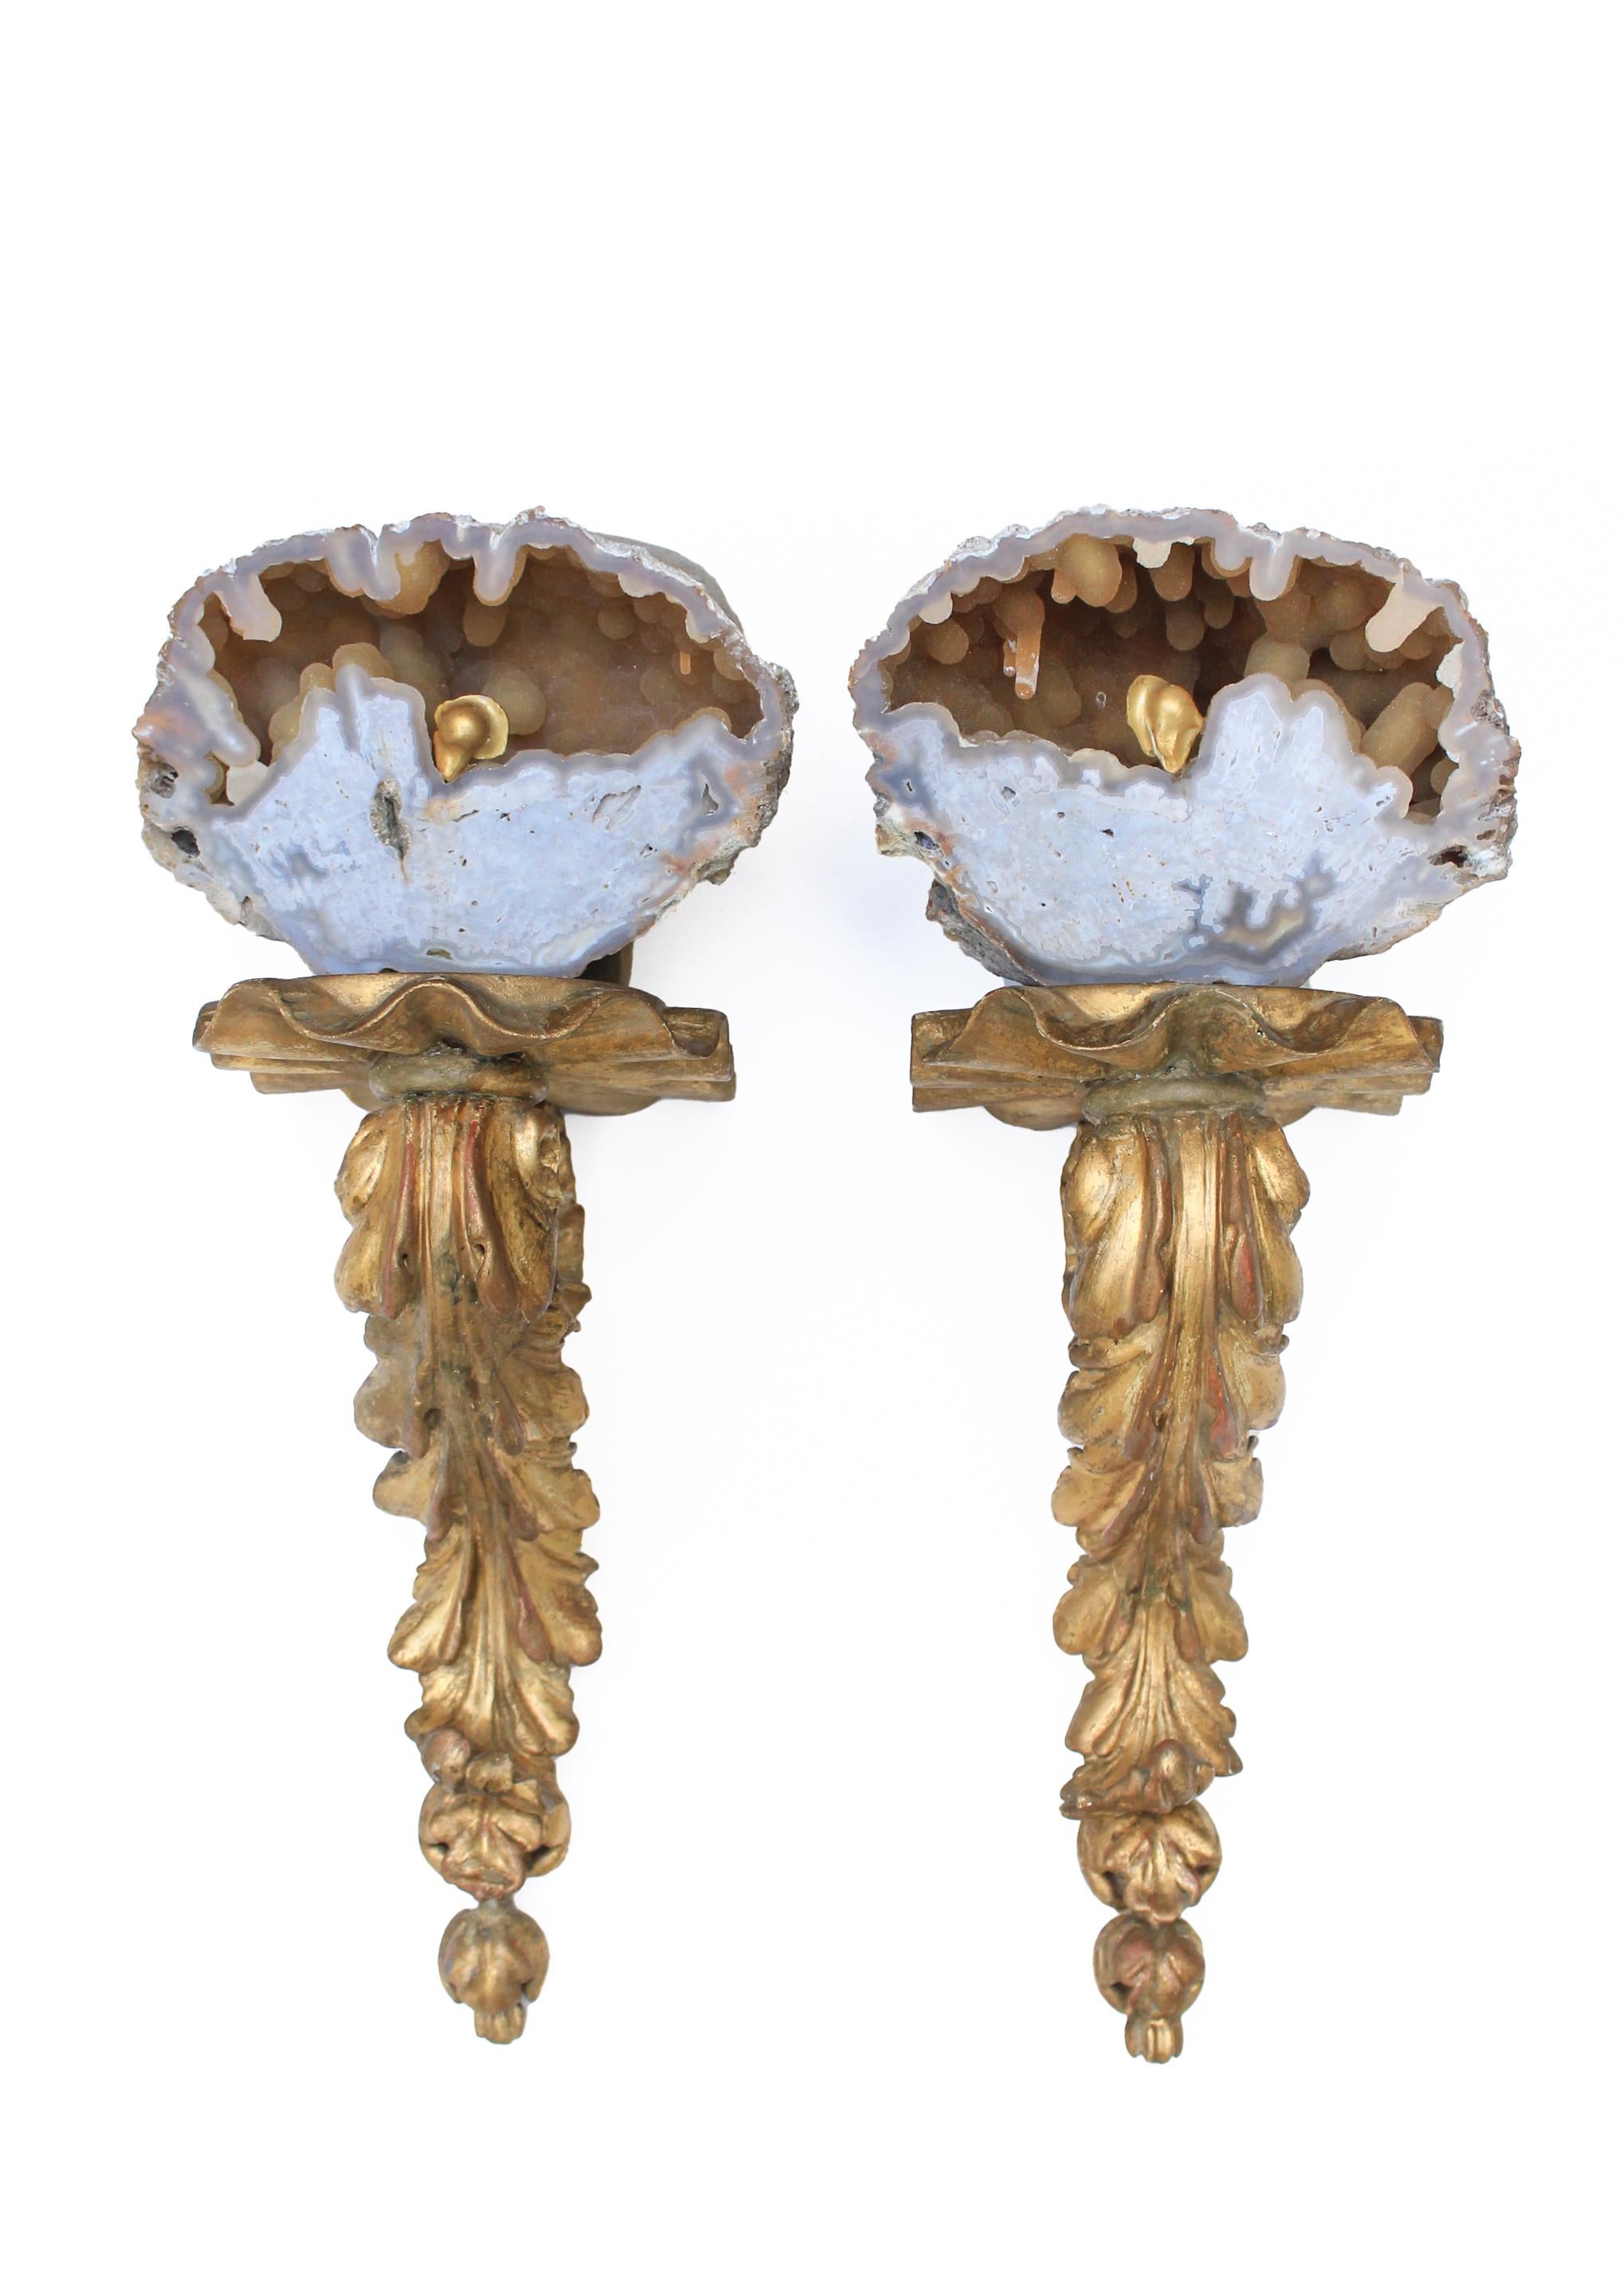 Pair of 18th century Irish Georgian sconces with agate coral and coordinating gold leaf baroque pearls.

Fossil agate coral is Florida's state stone and is known for its unique formation that can take place over 20 million years. It's a natural